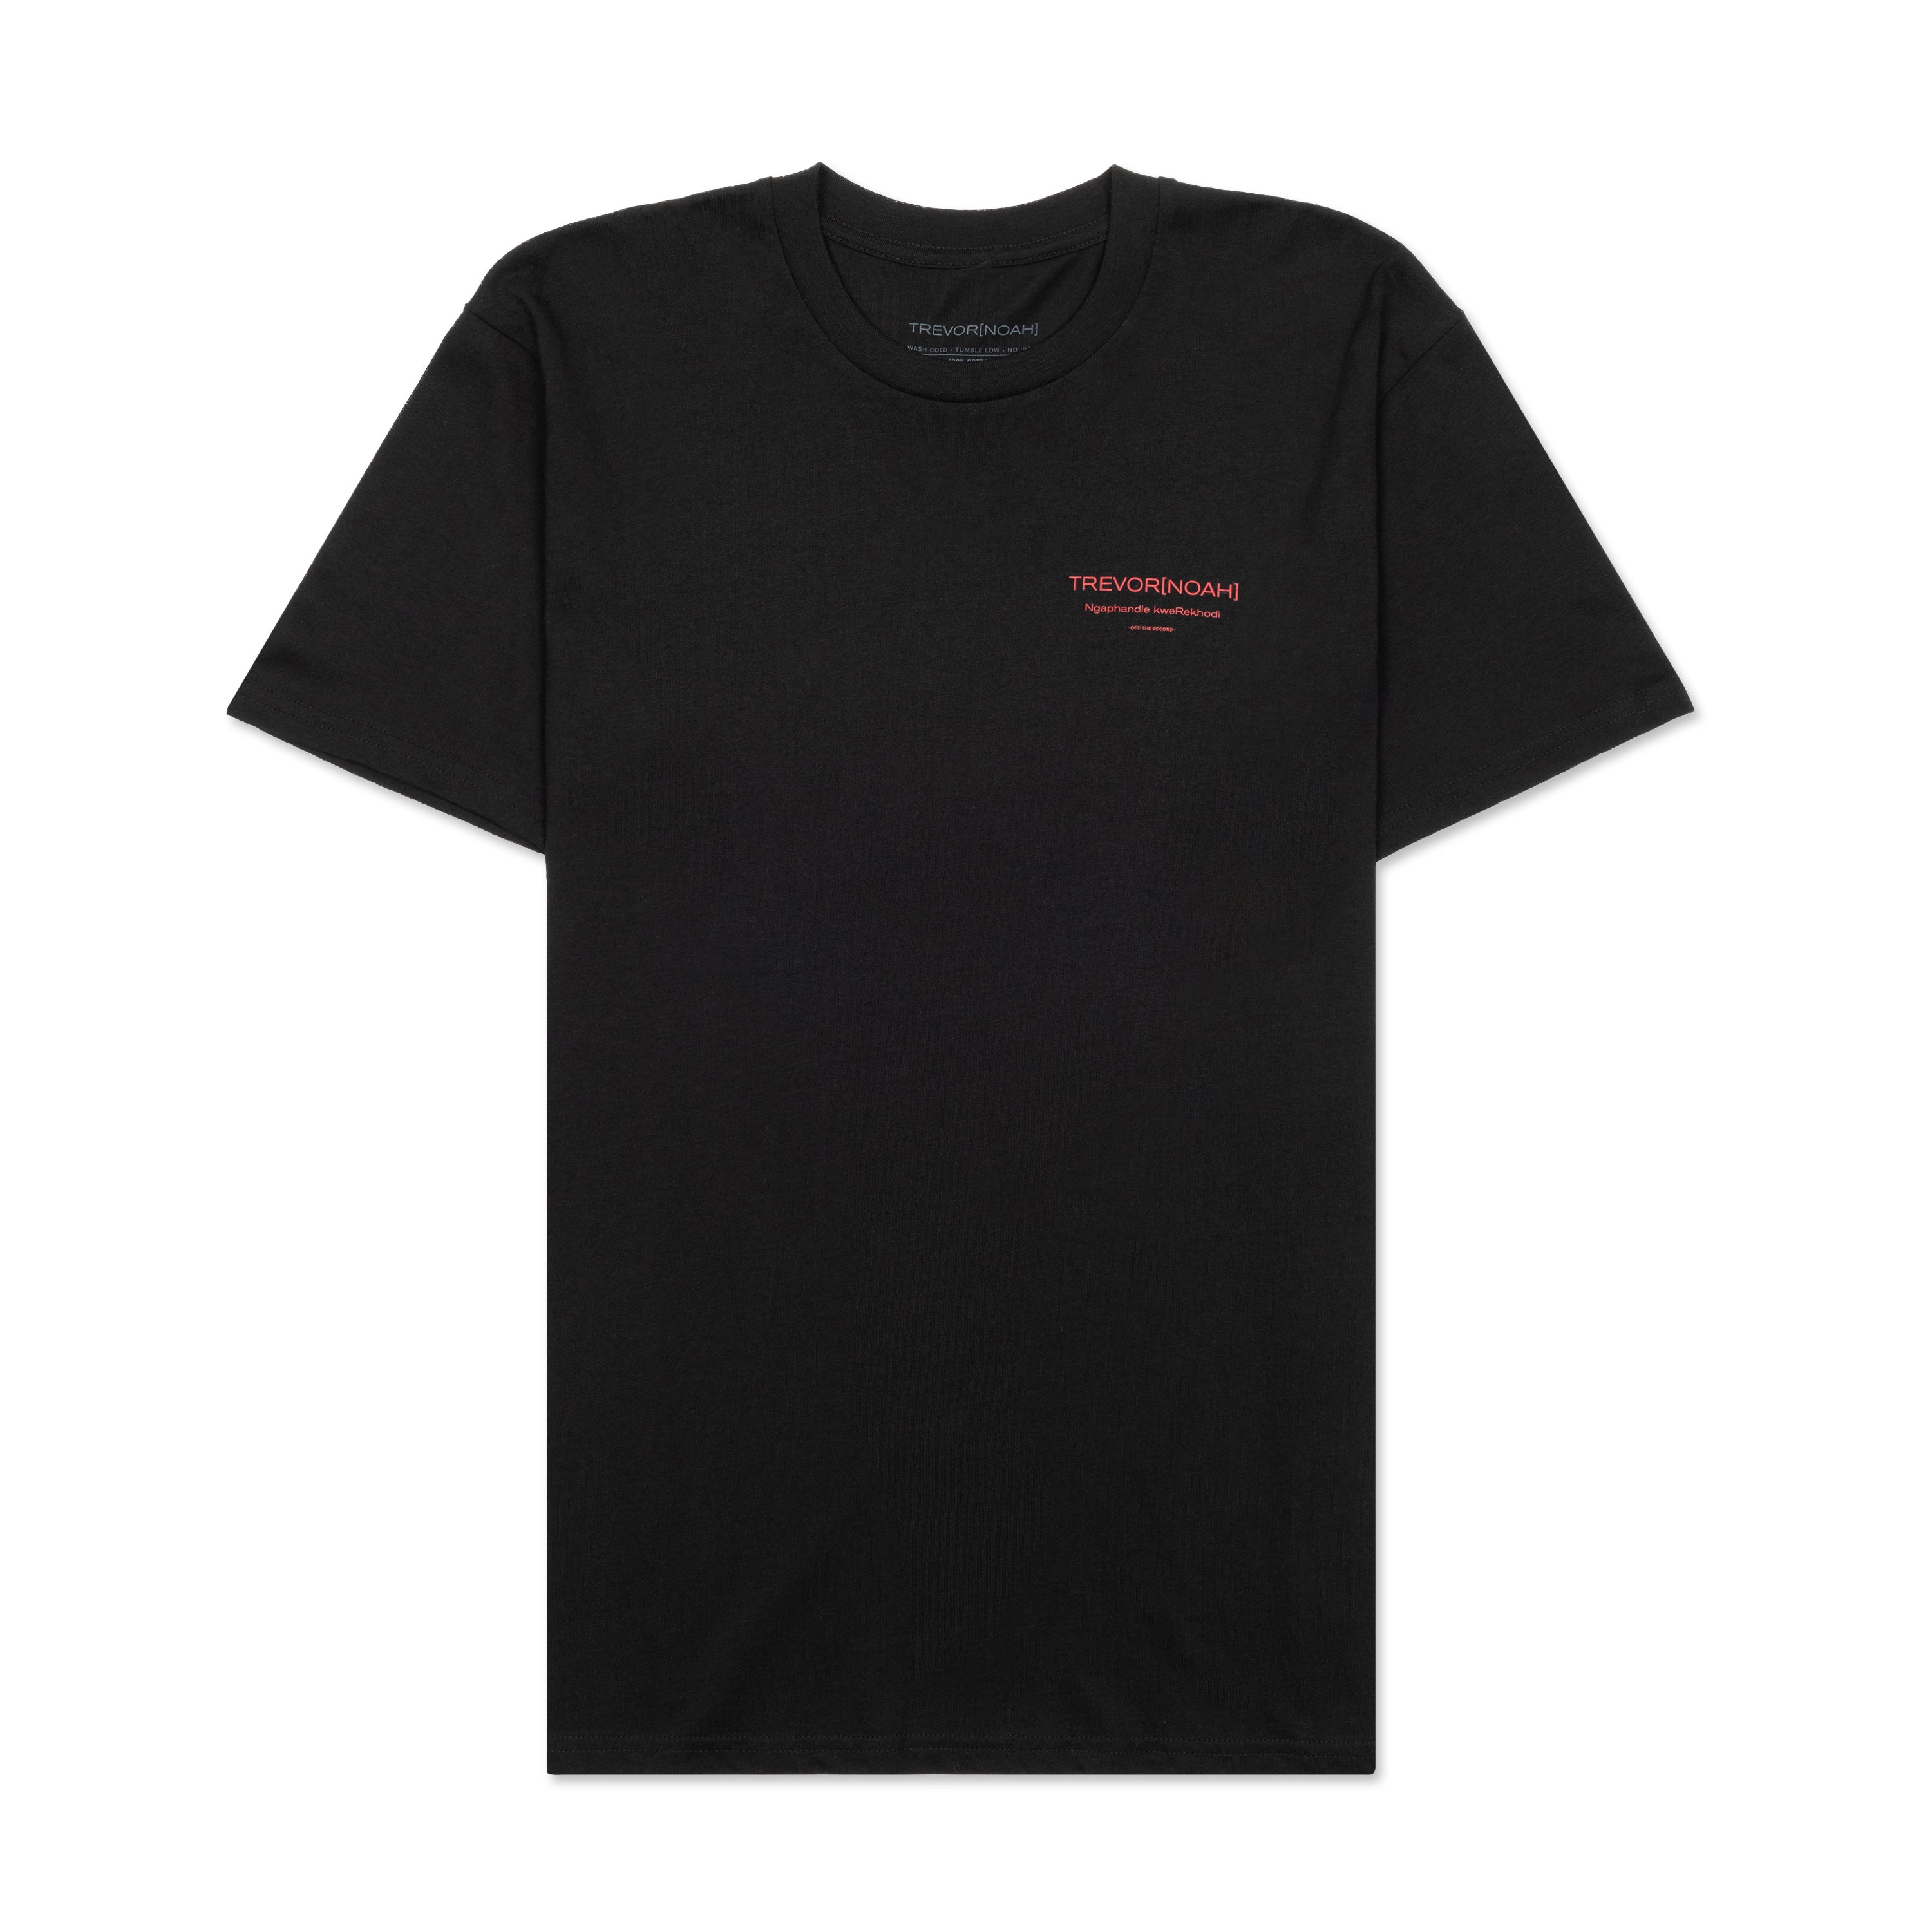 Off The Record Tour Date Tee - Black